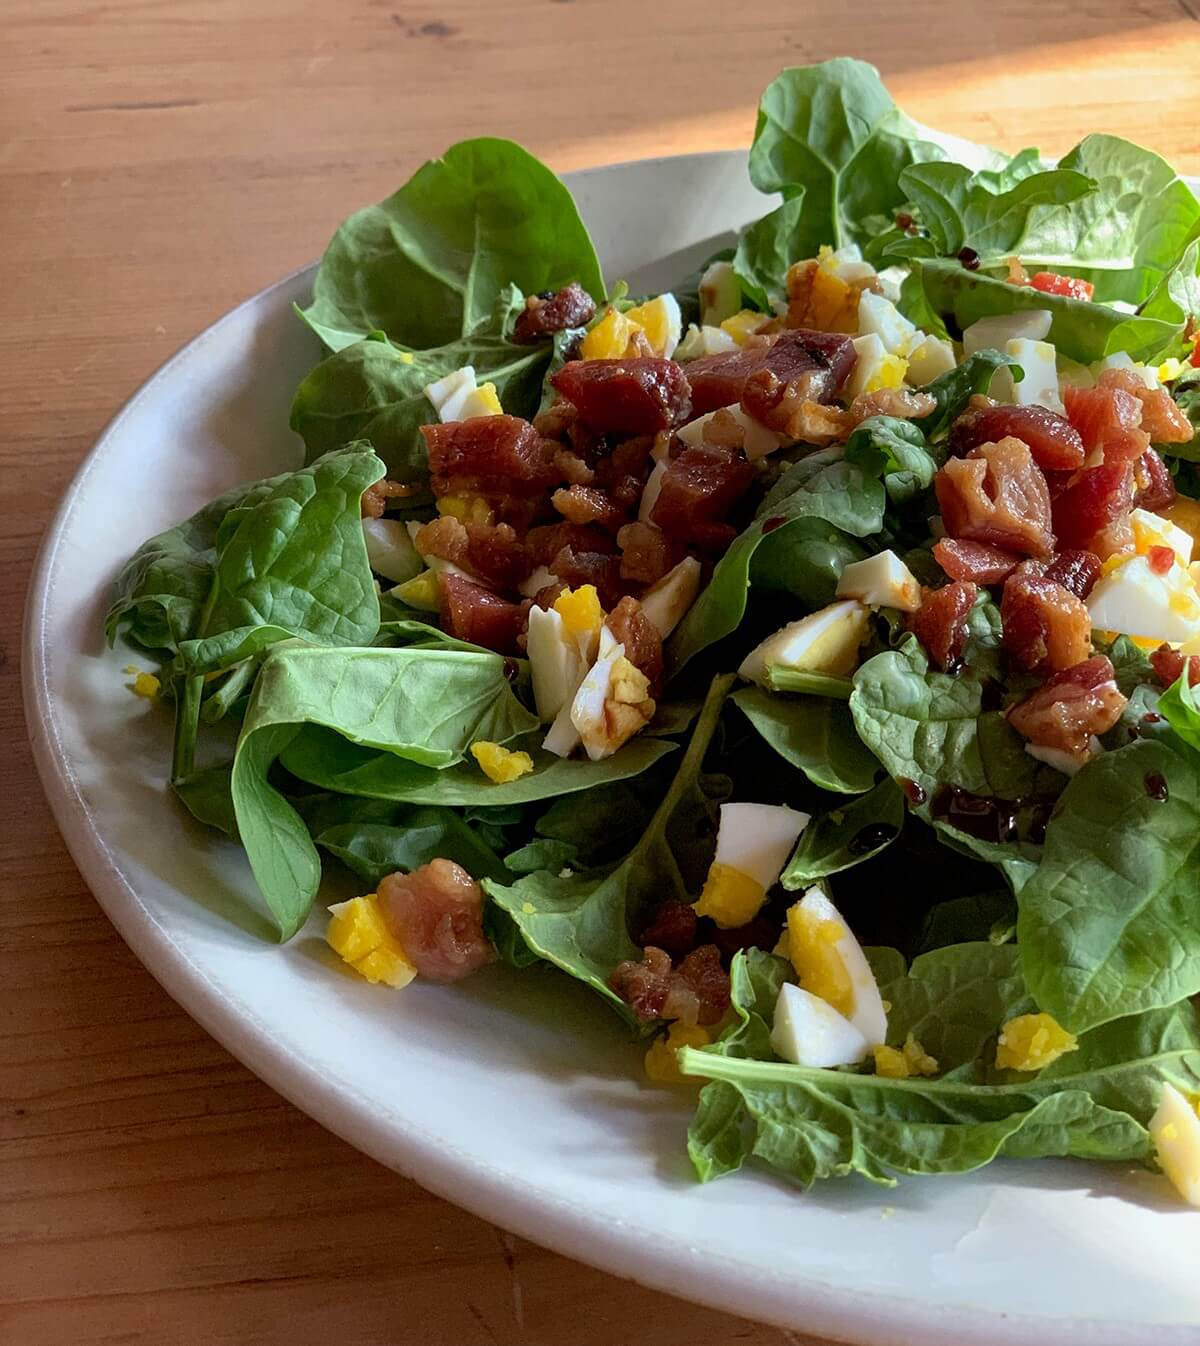 Spinach and Pancetta Salad - Niman Ranch